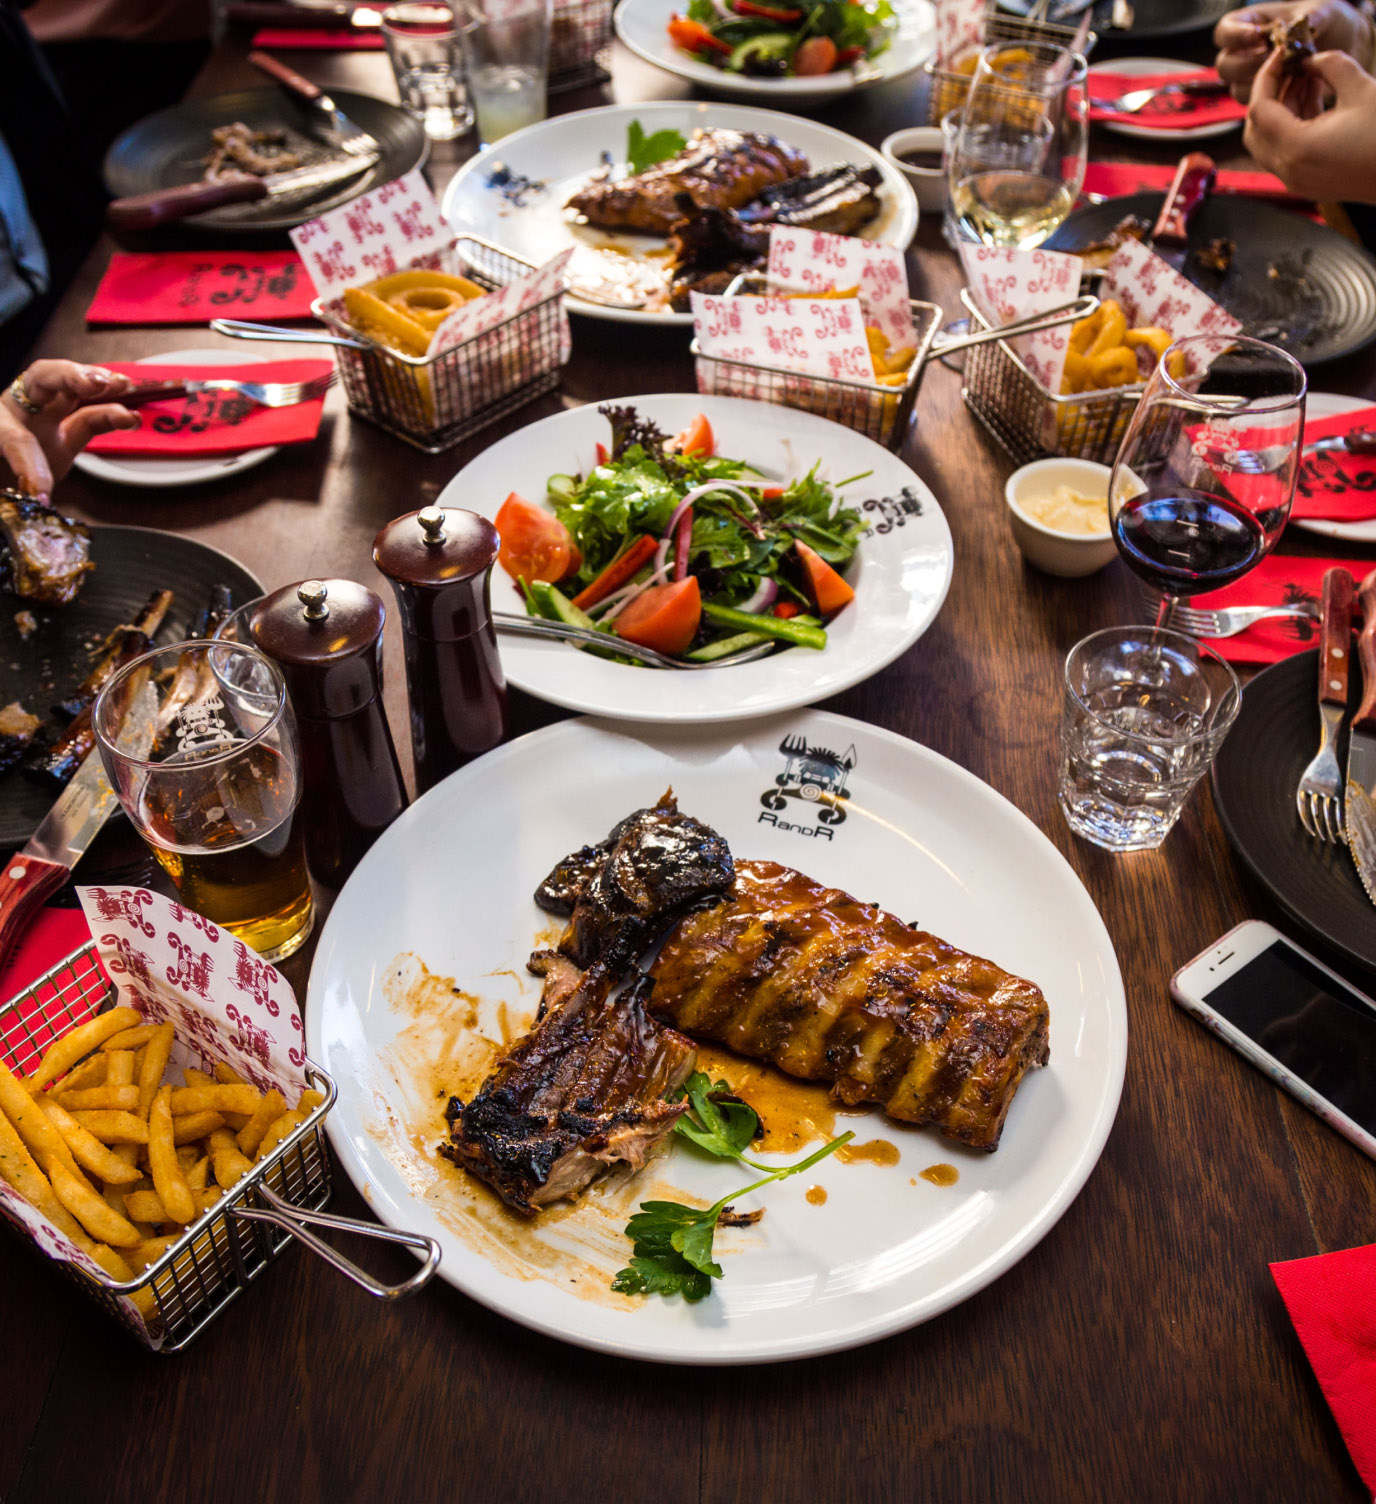 Get the whole gang together, and share a whole table of mouth watering food from Ribs and Rumps.